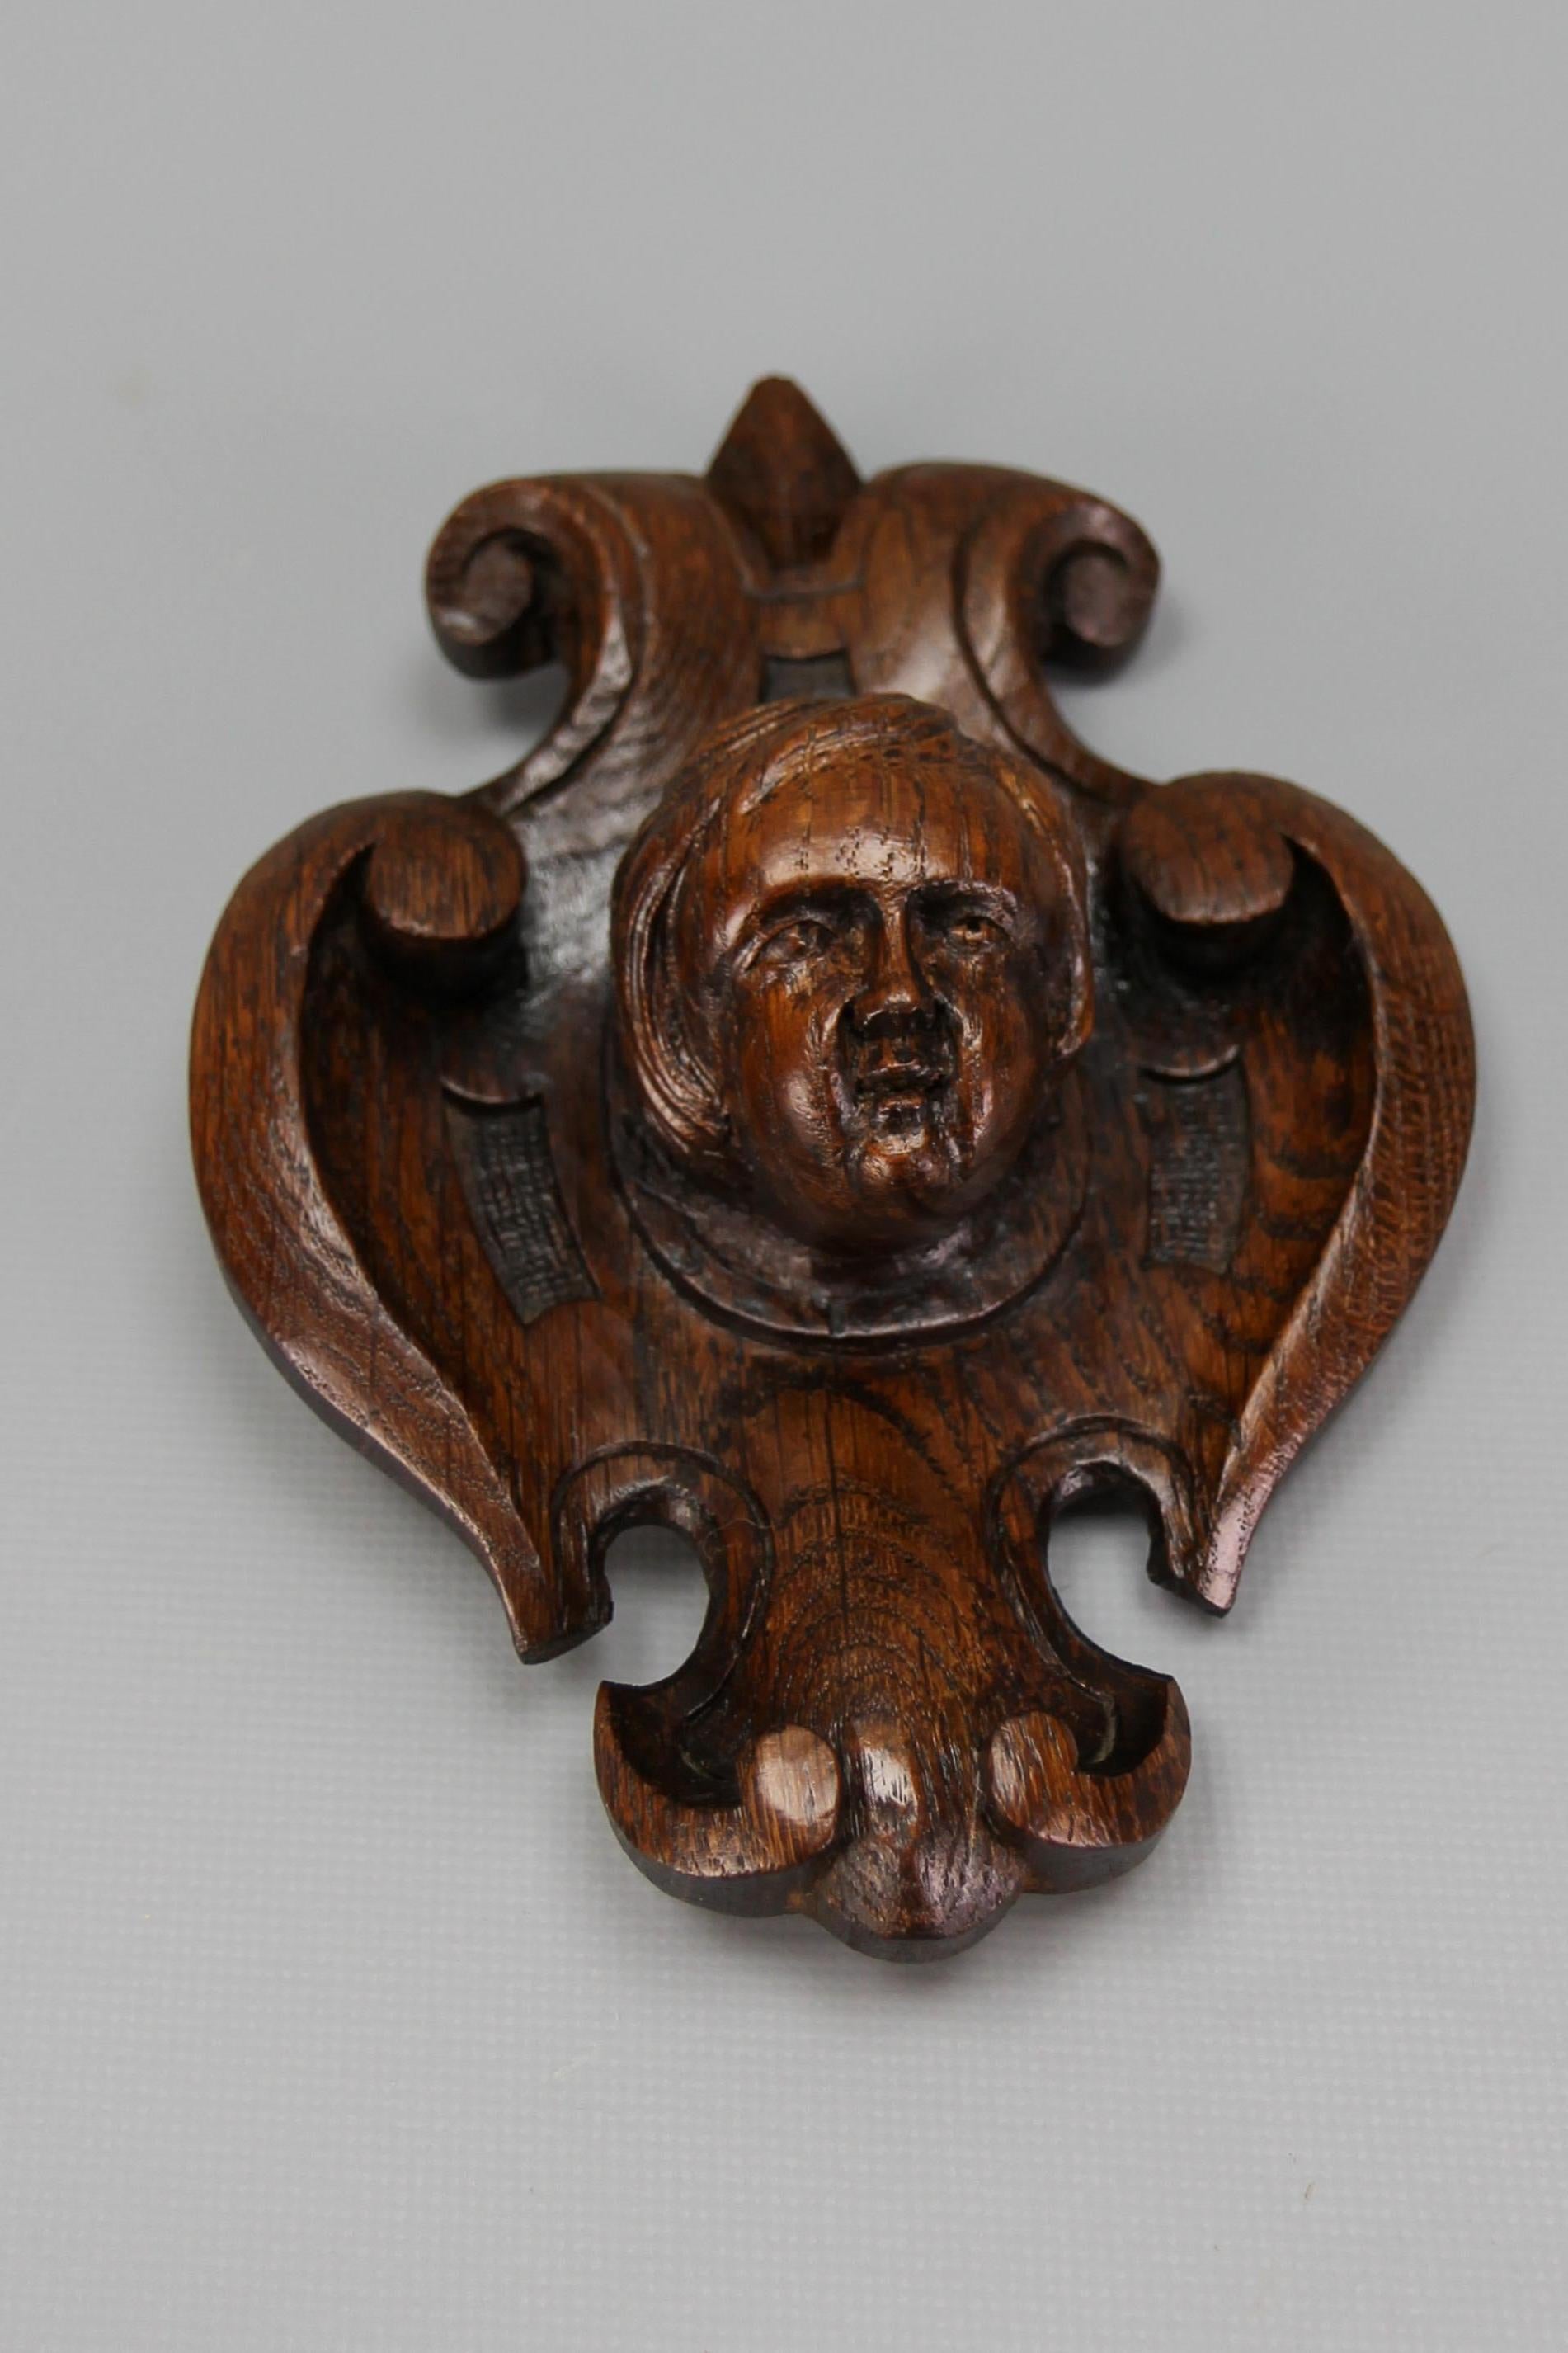 Antique French hand-carved oak wood wall plaque with cherub's head, ca. 1900.
An adorable Baroque-style hand-carved dark brown oak wood wall plaque or wall decoration depicting a head of cherub.
In good and age-appropriate condition with slight